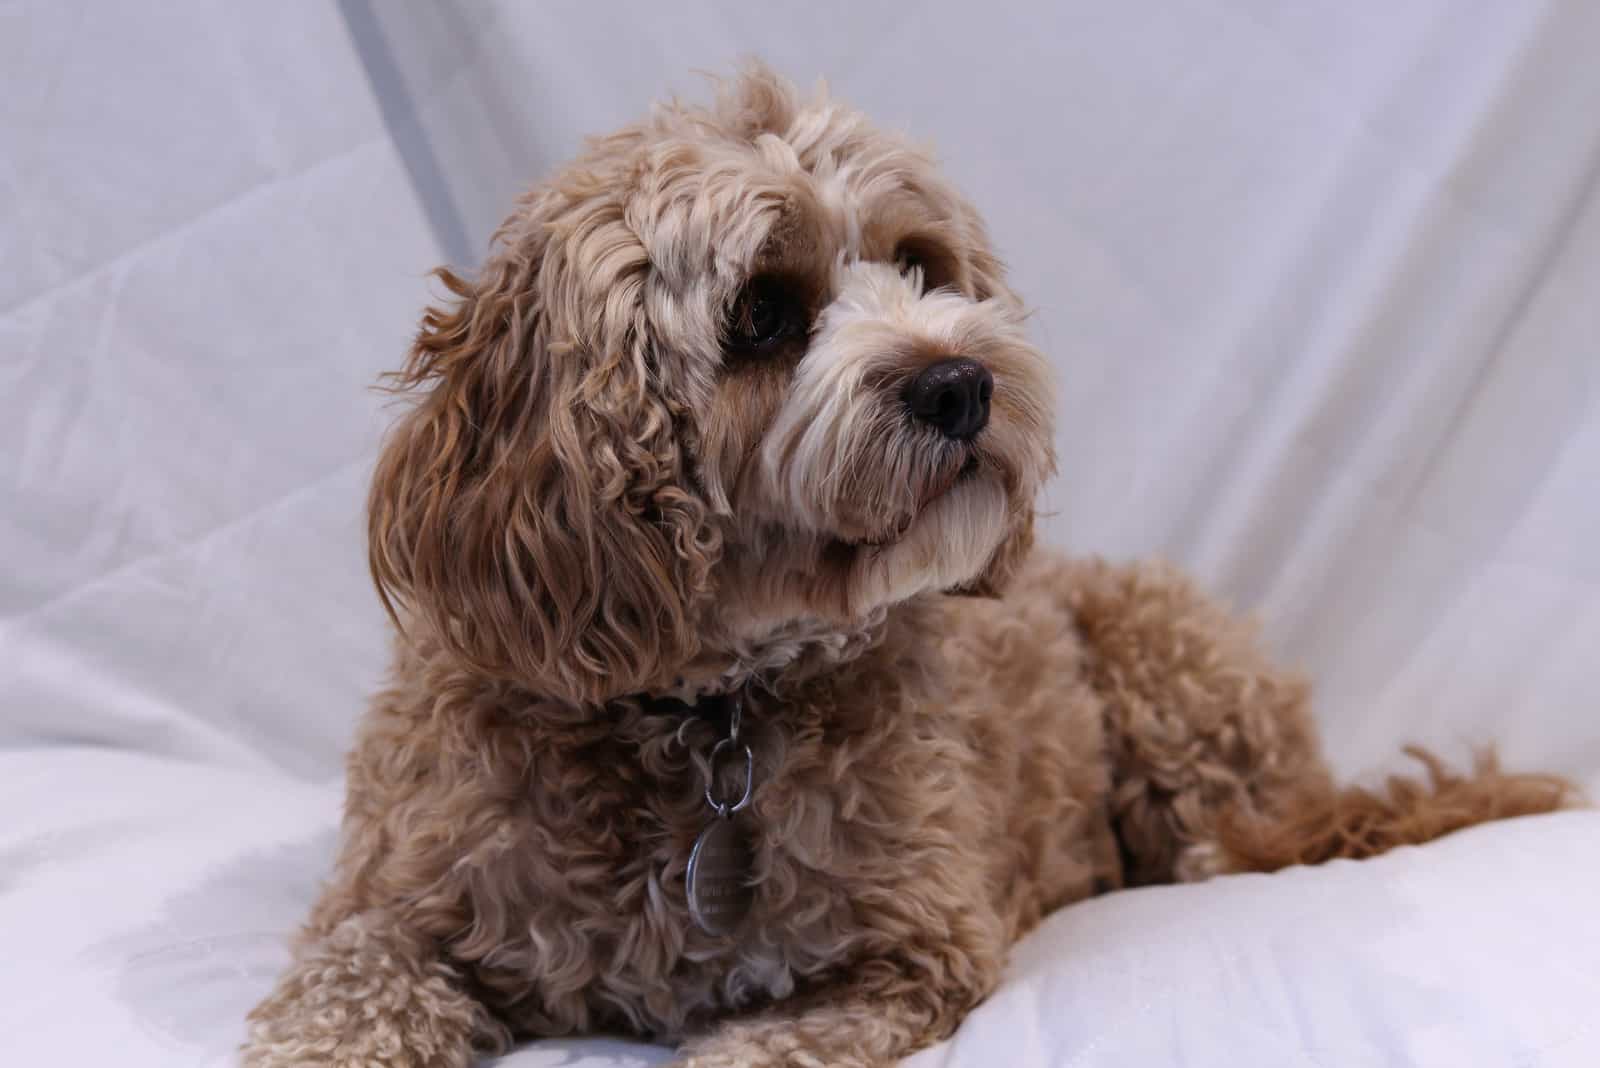 Cute cavapoo dog lying down against a white background